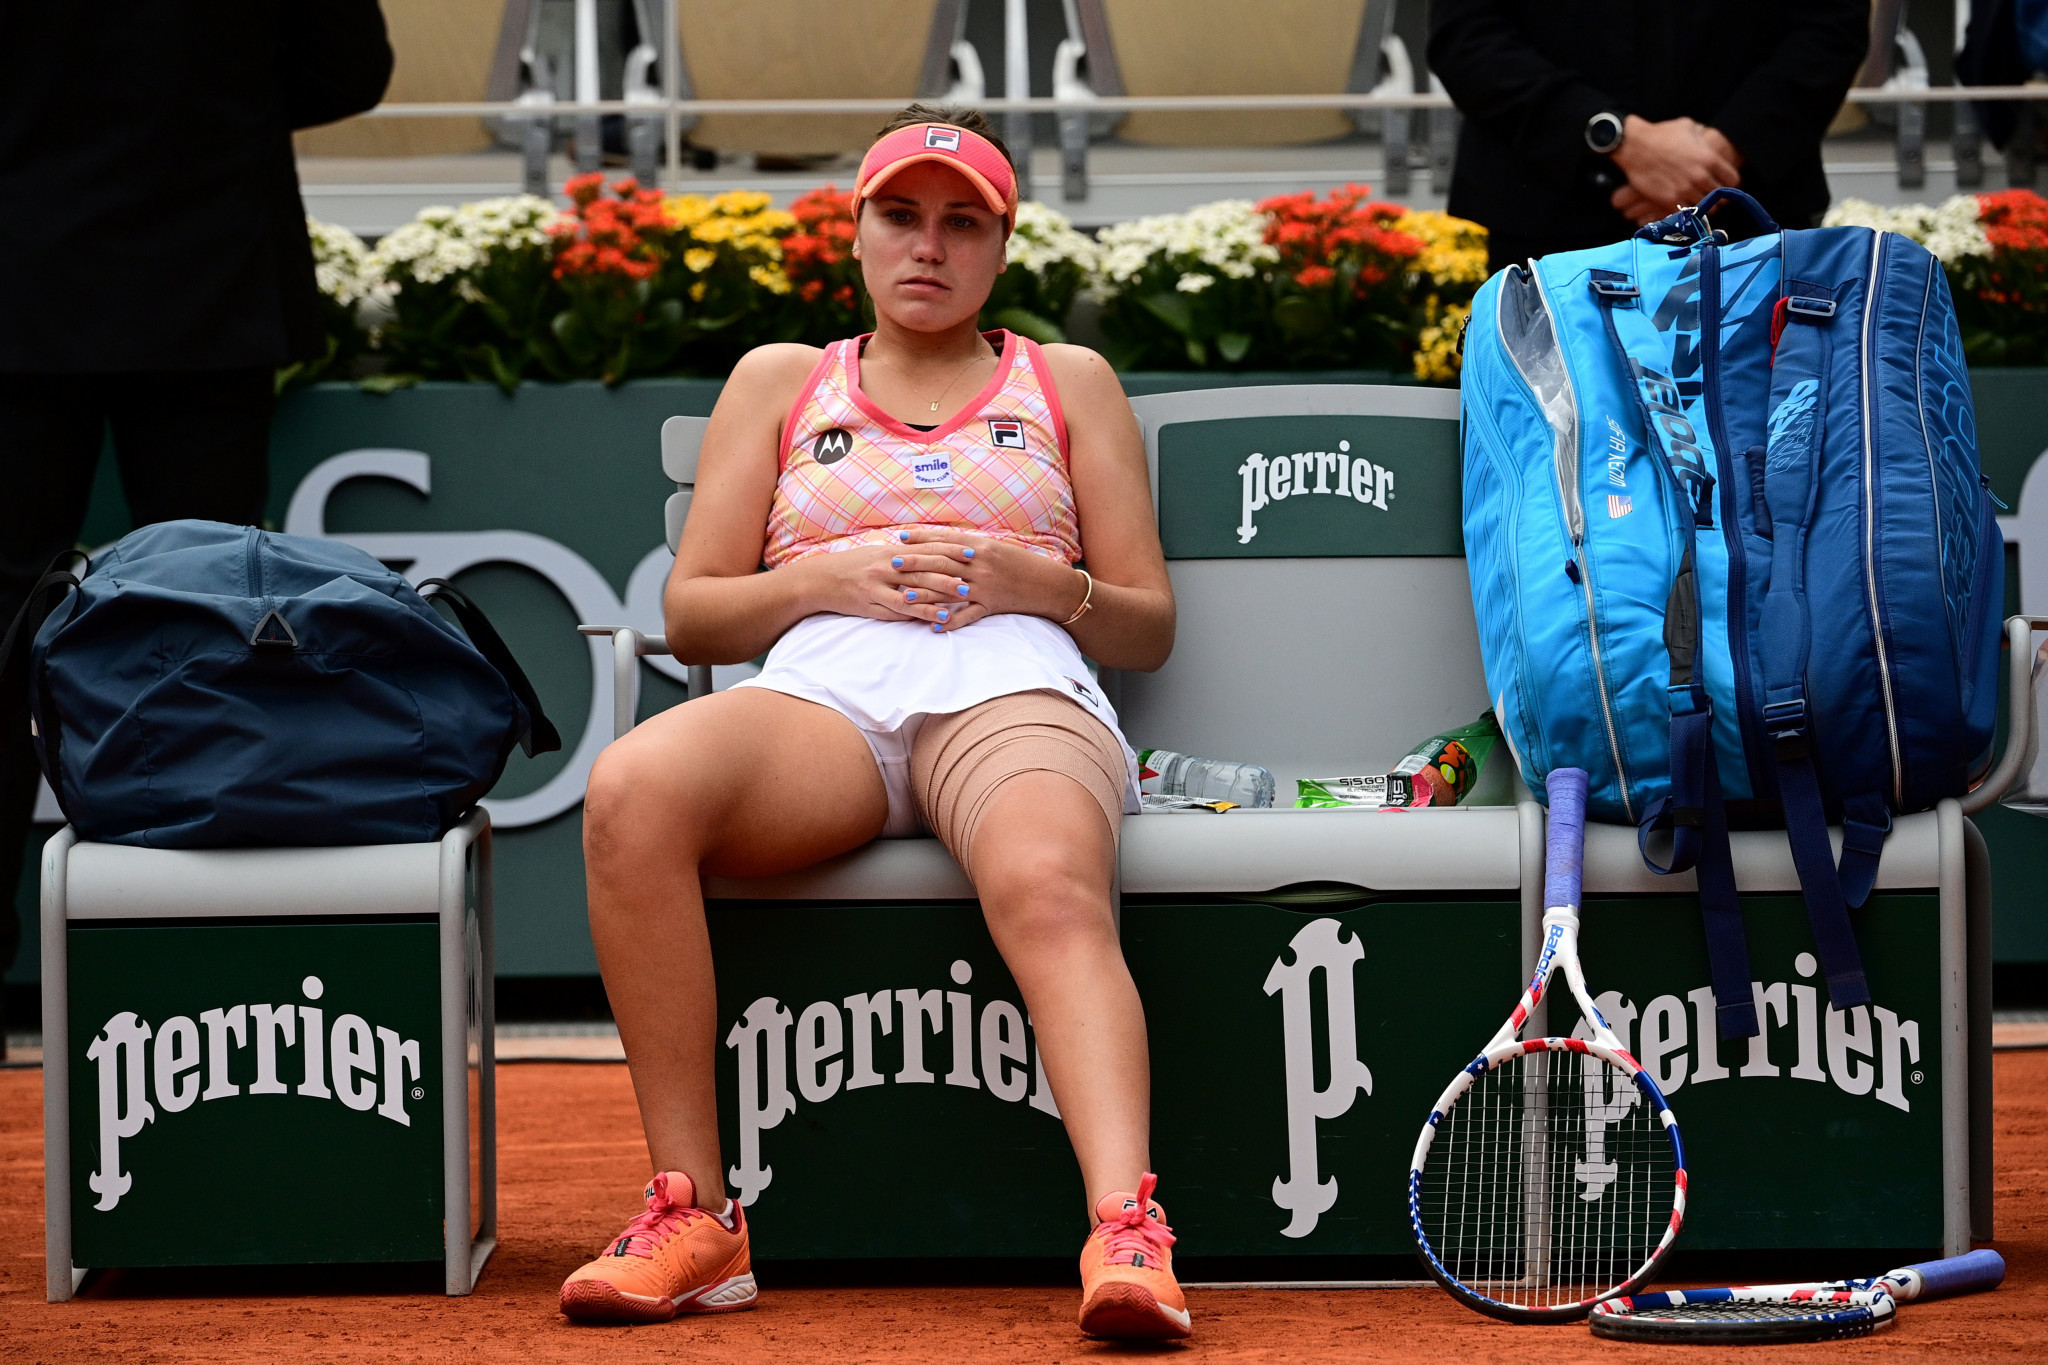 Kenin, who won the Australian Open earlier this year, looks devastated after losing the women's final at Roland Garros ©Getty Images